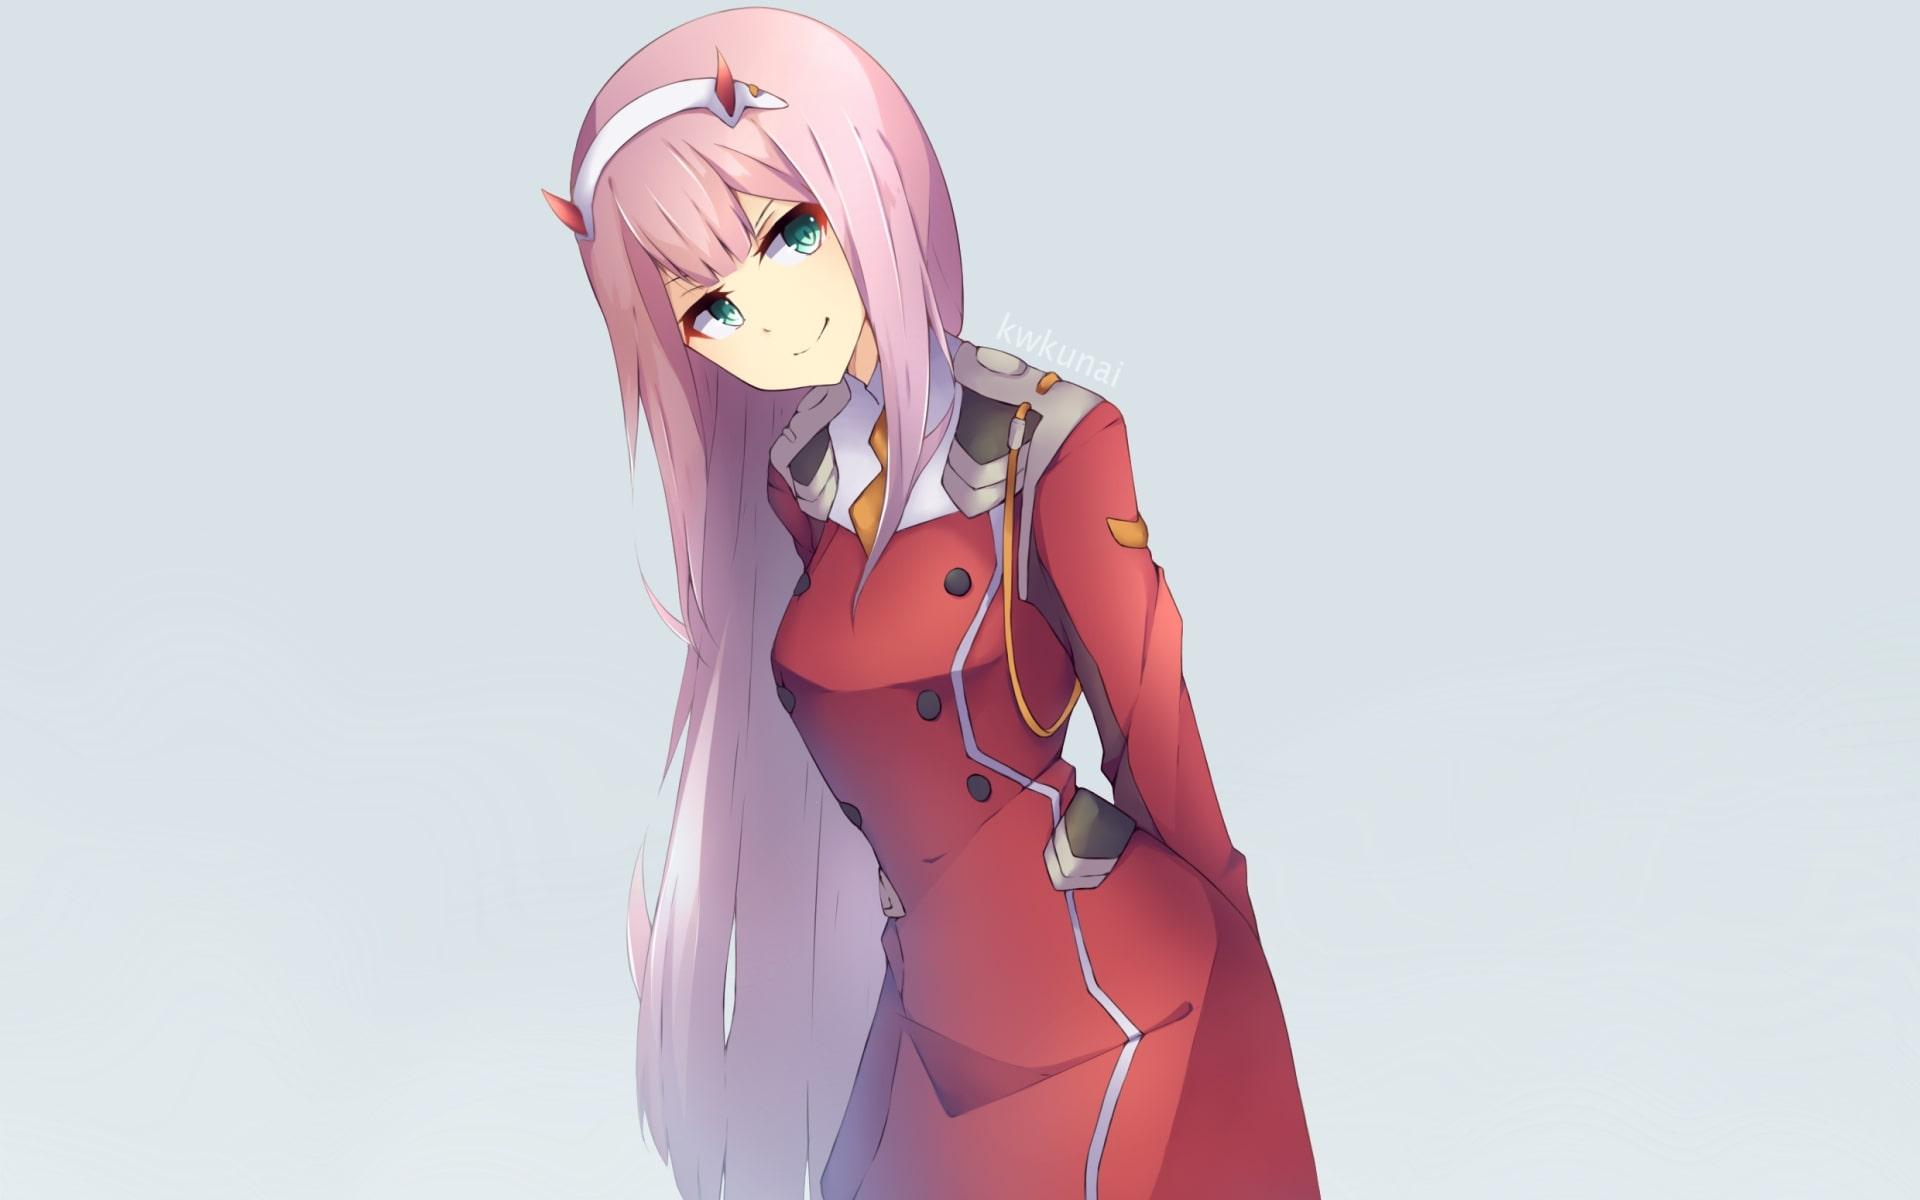 Wallpaper of Anime, Darling in the FranXX, Zero Two, 02